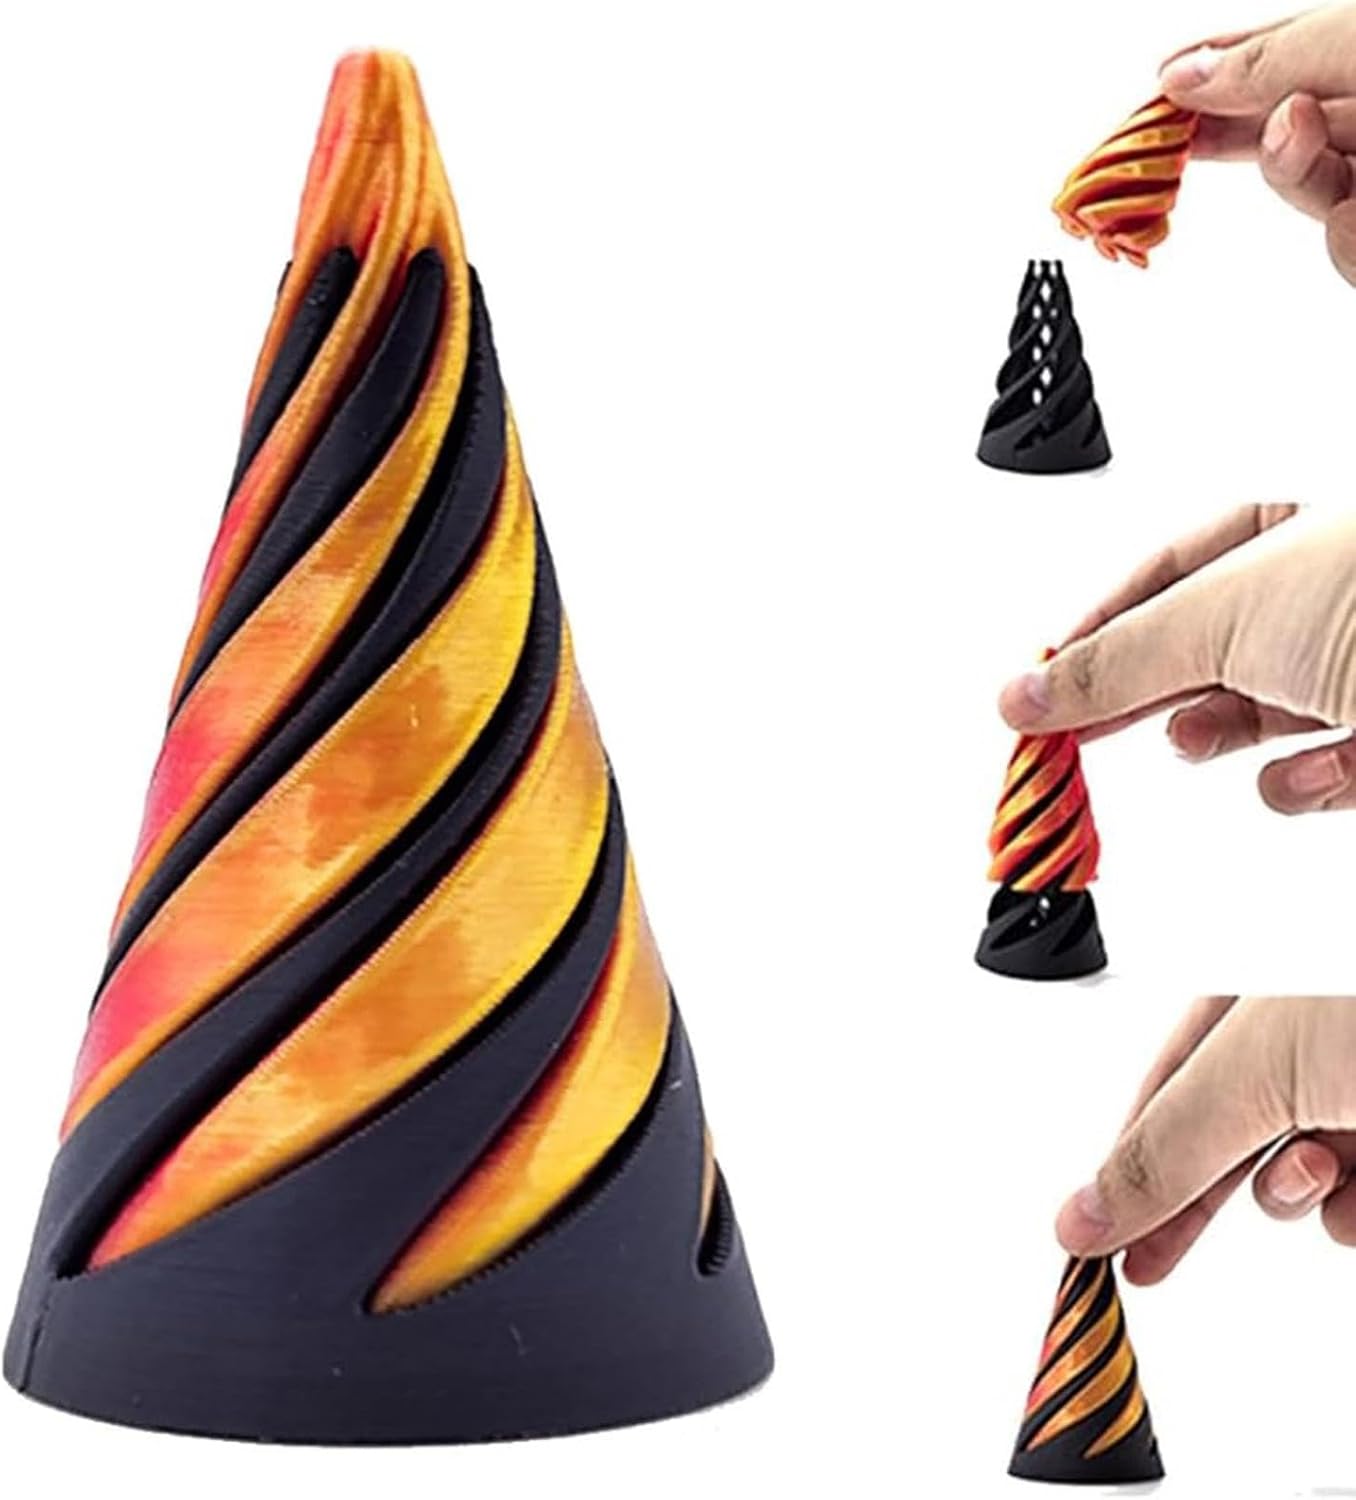 Impossible Pyramid Passthrough Sculpture, 3D printed Rotating Spiral Cone Fingertip Toy